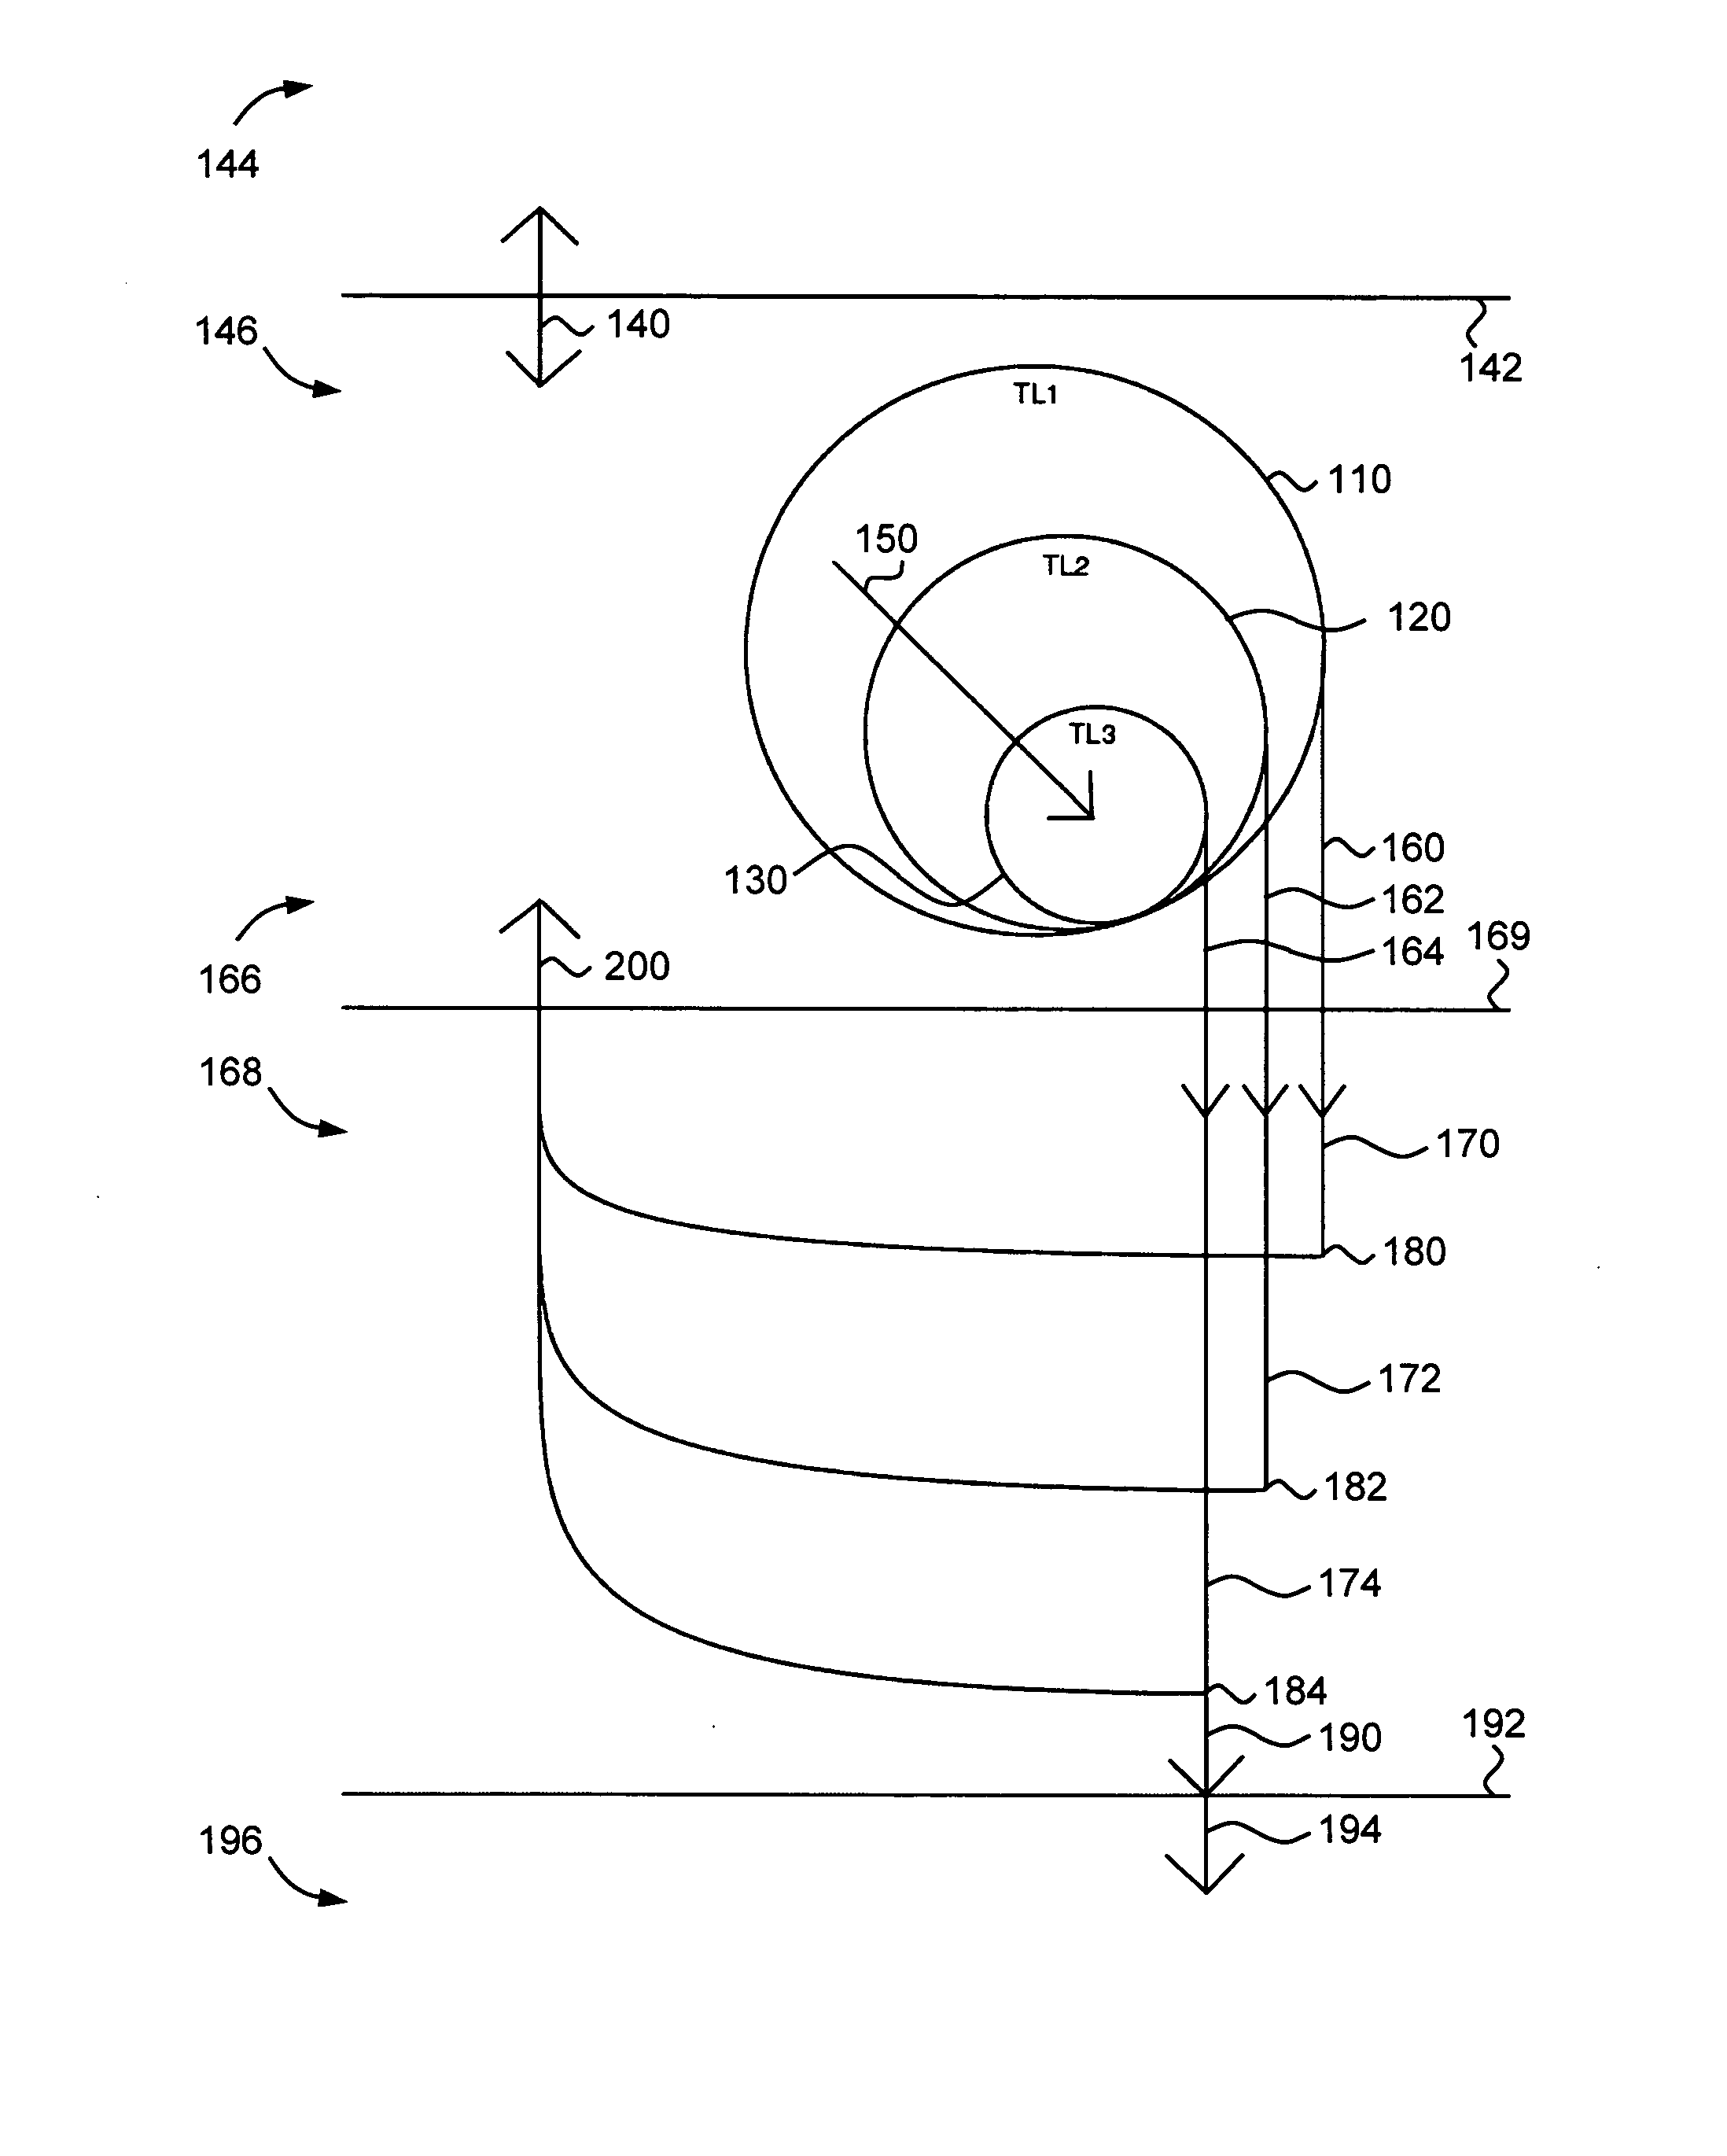 Method of sequestering carbon dioxide in aqueous environments